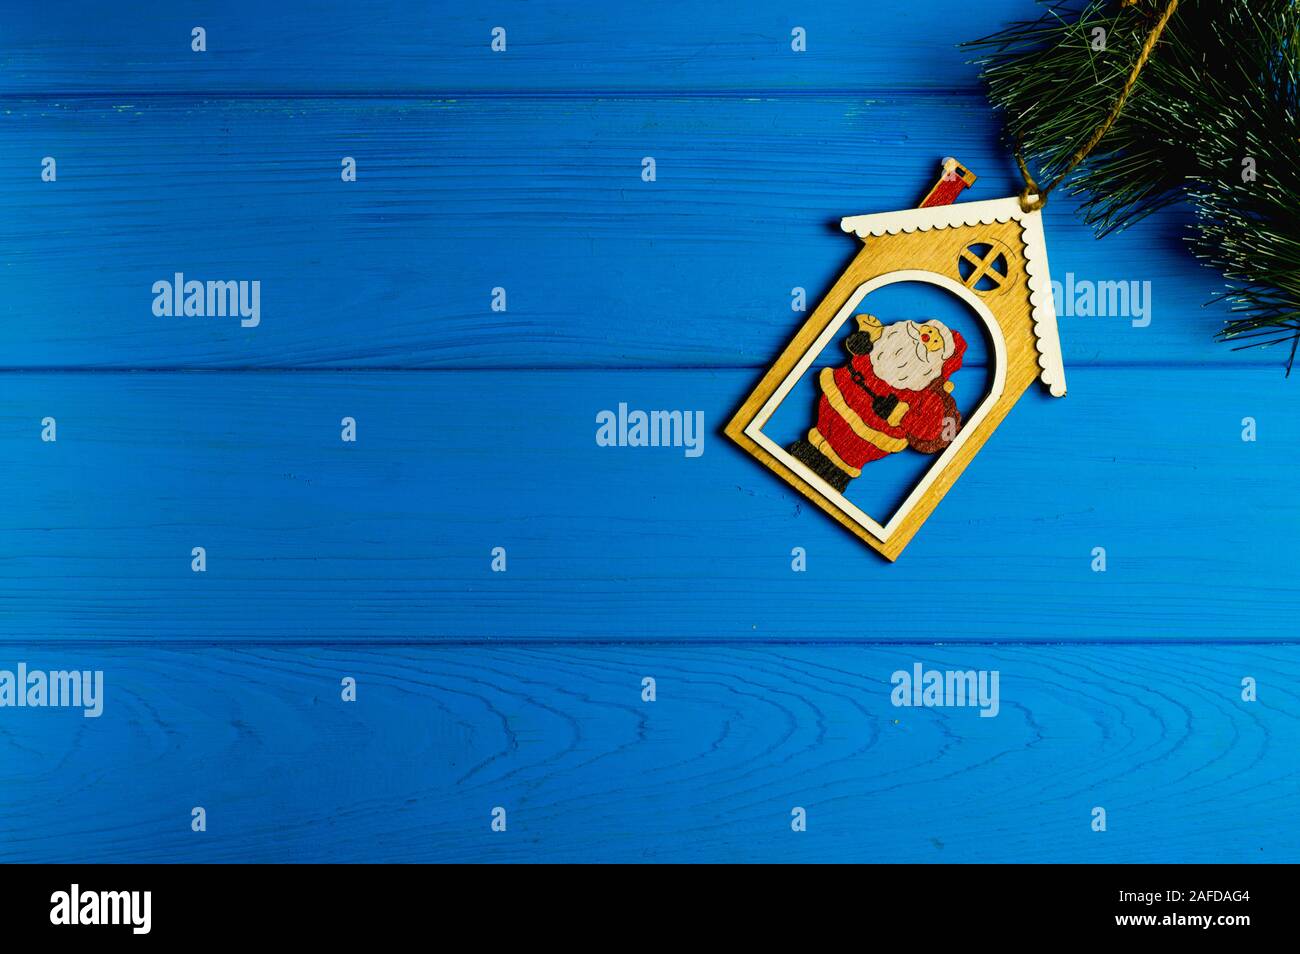 Christmas card: figurine of Santa Claus on a blue background Stock Photo